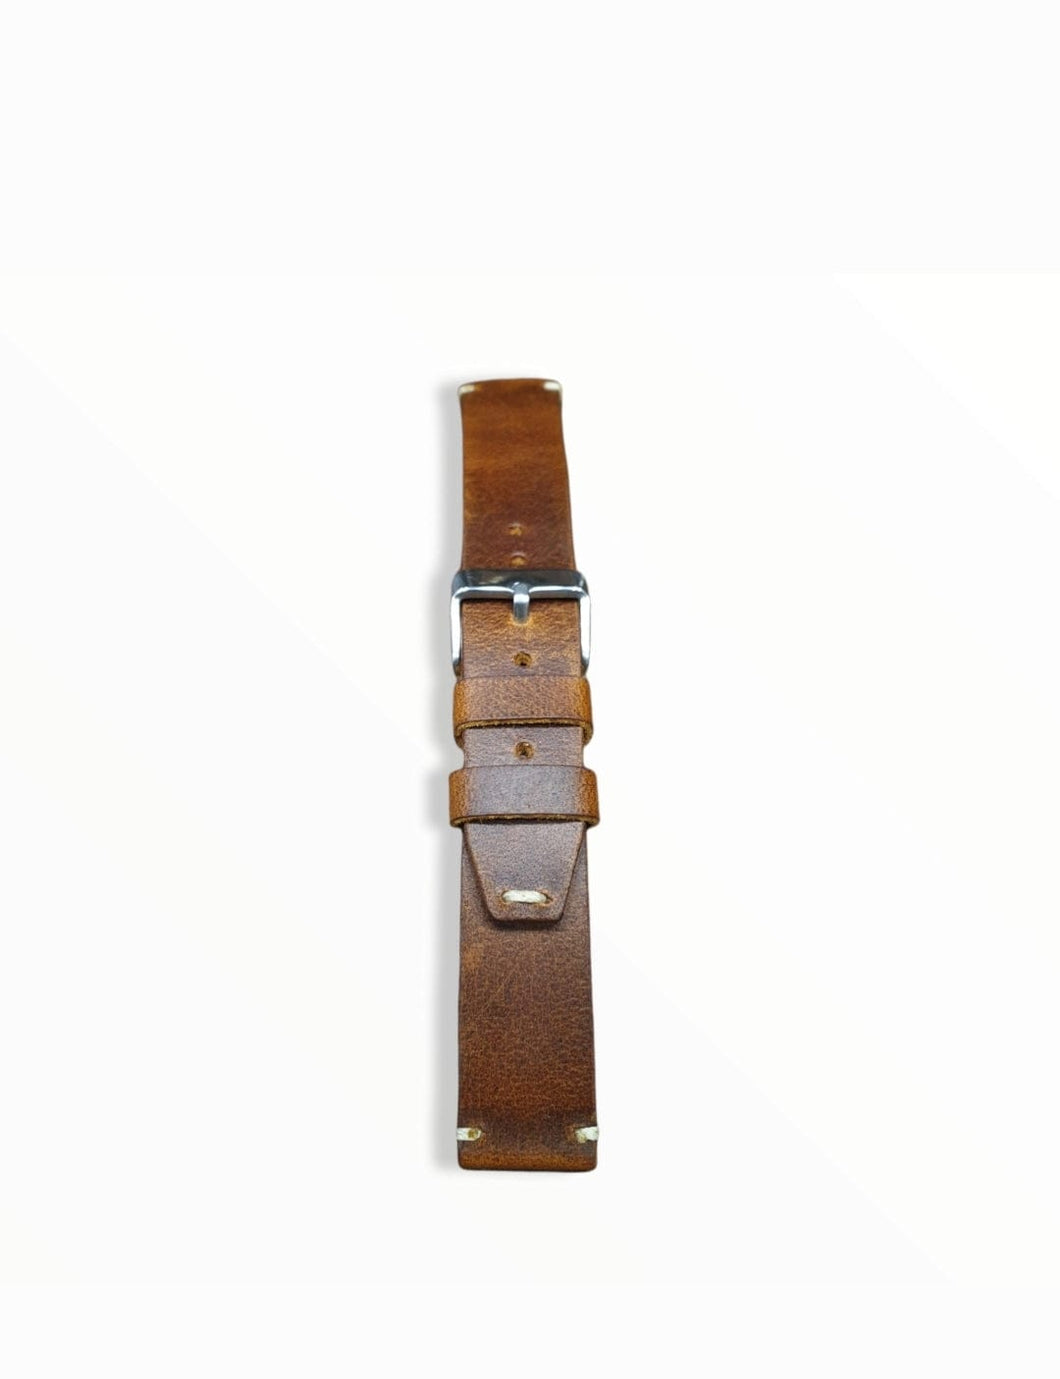 Indianleathercraft Watch Bands Handmade tobacco brown leather strap